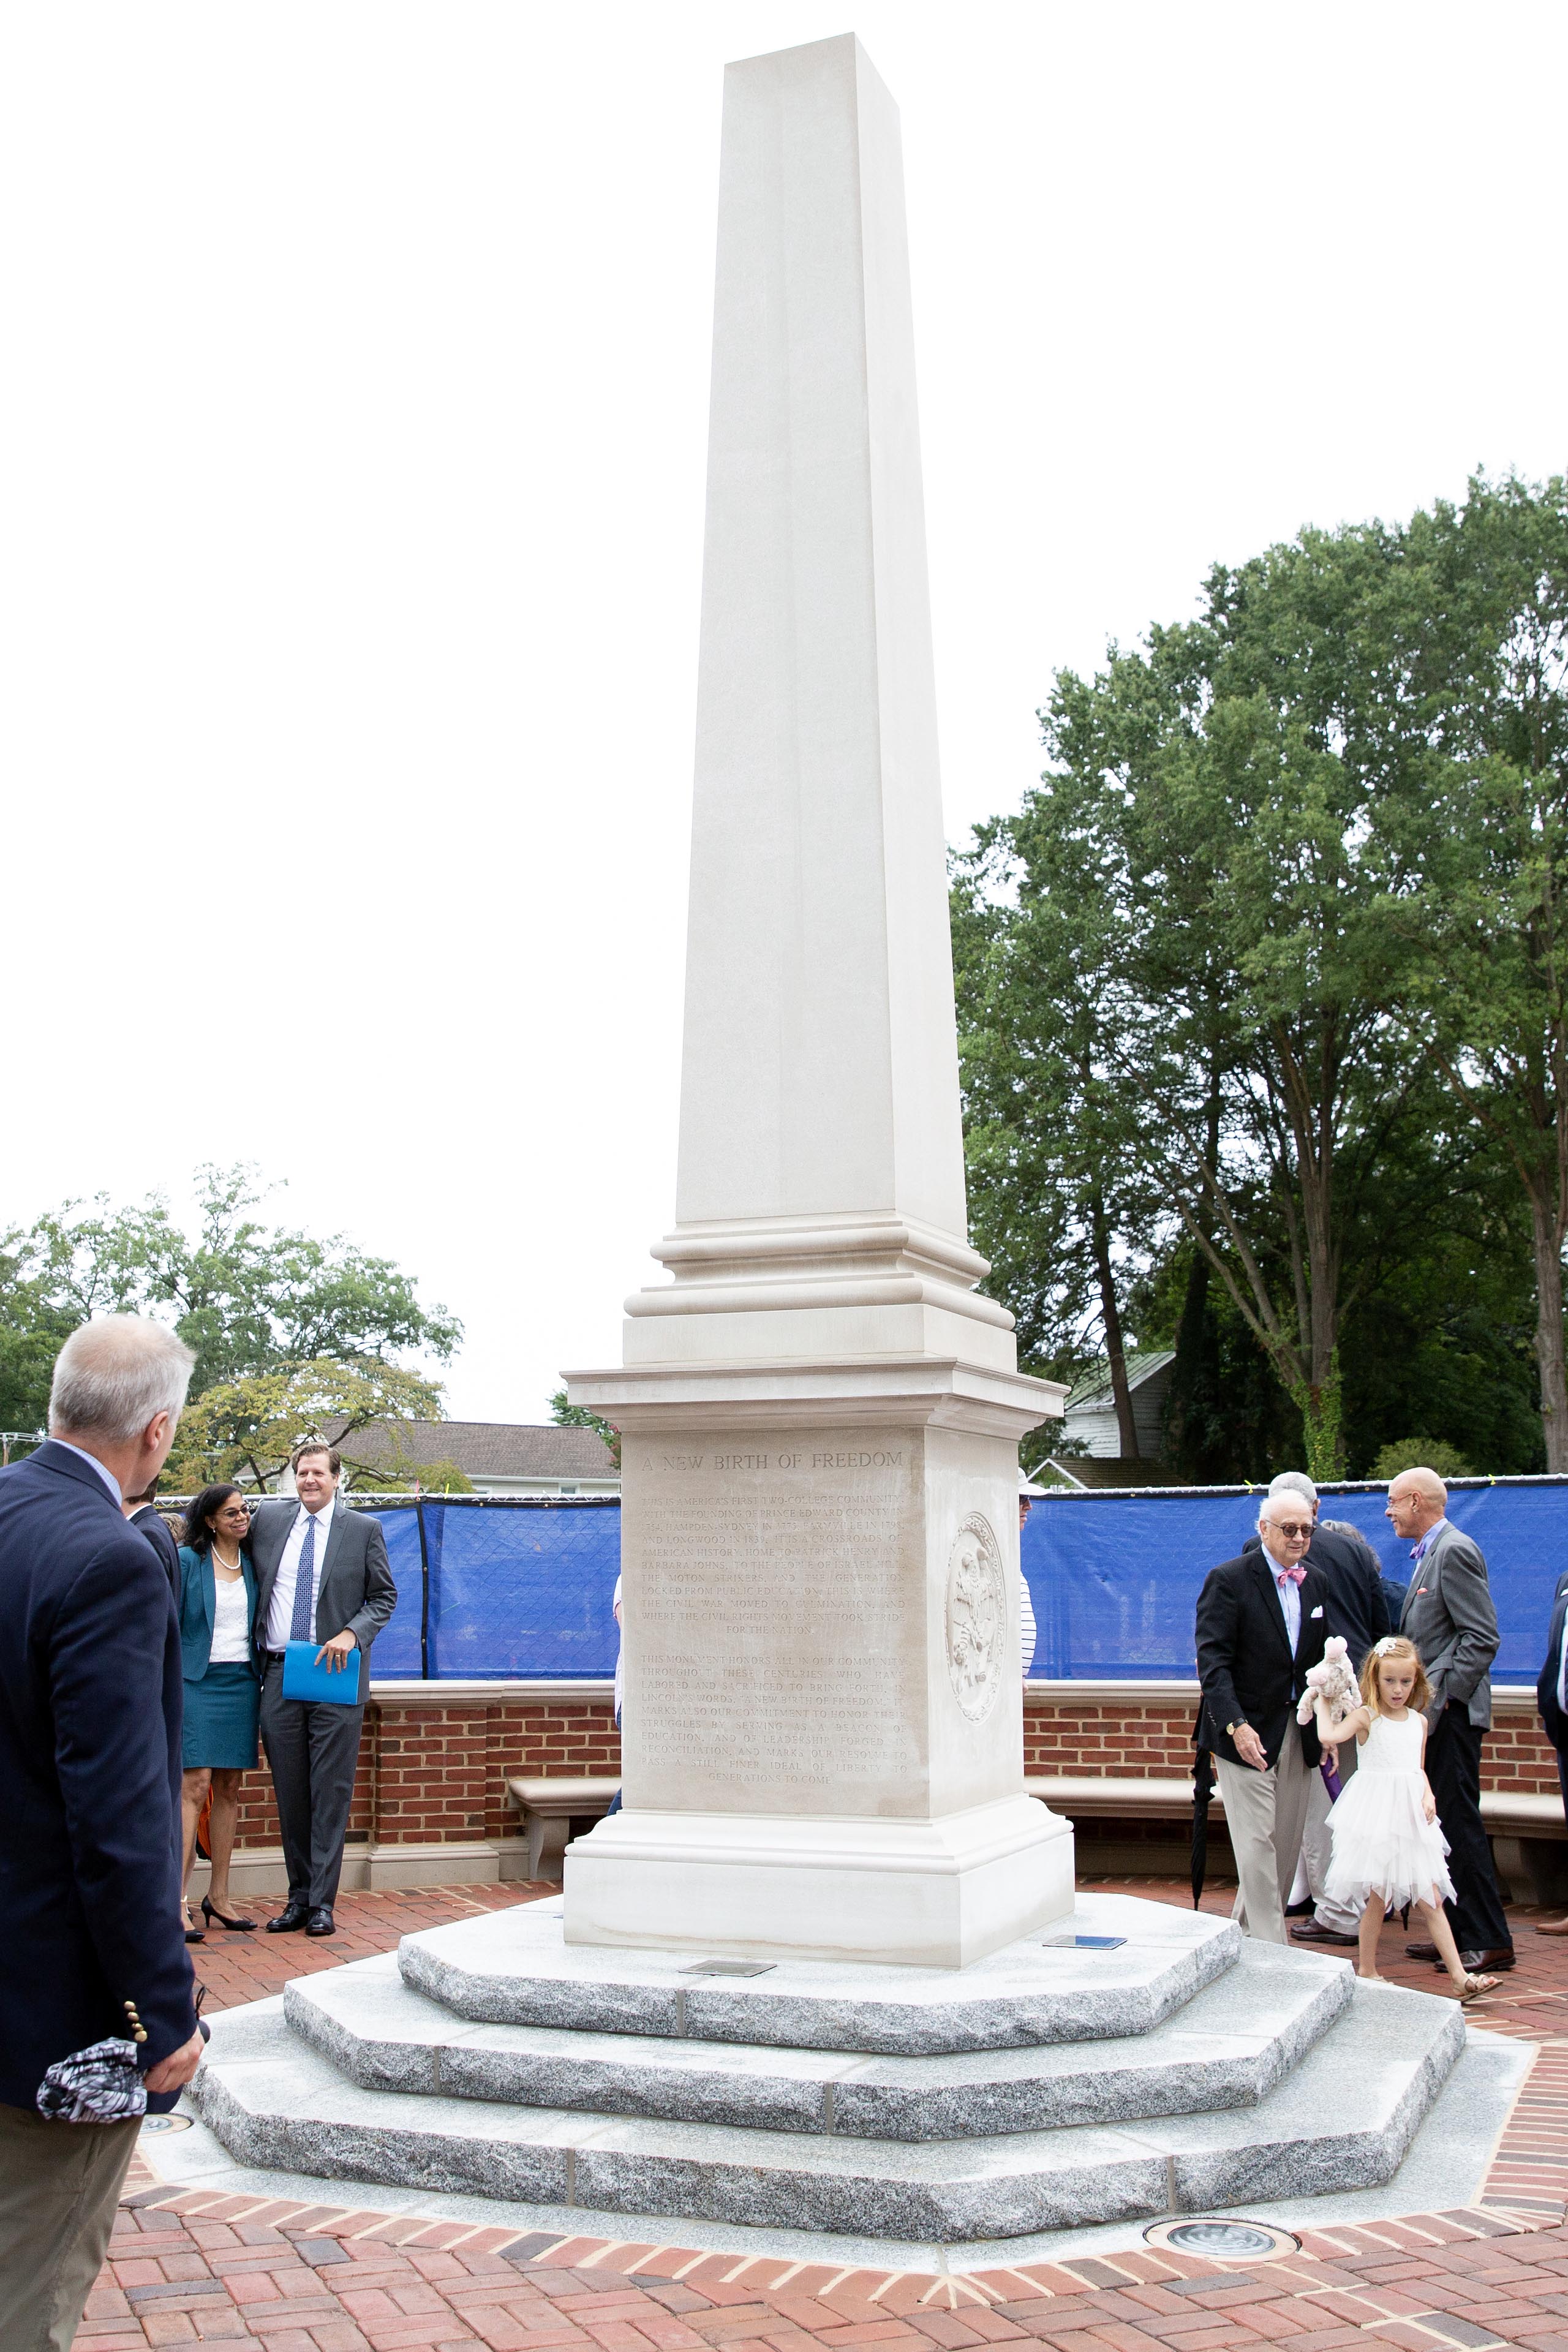 An image freedom monument during its dedication with several onlookers present